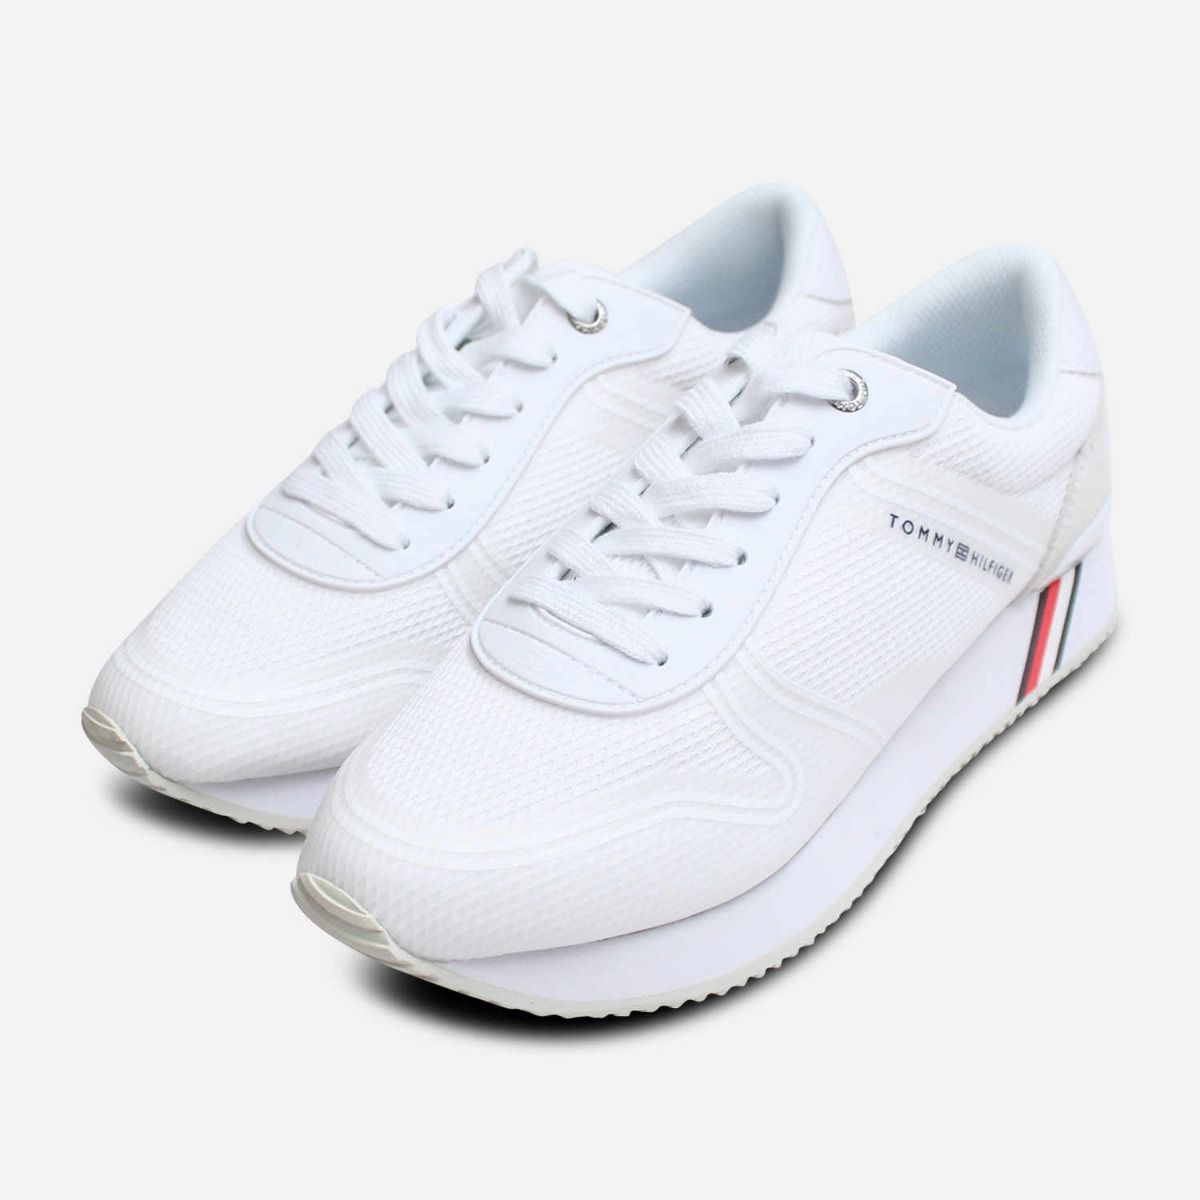 Tommy Hilfiger Womens Active Sneakers in White